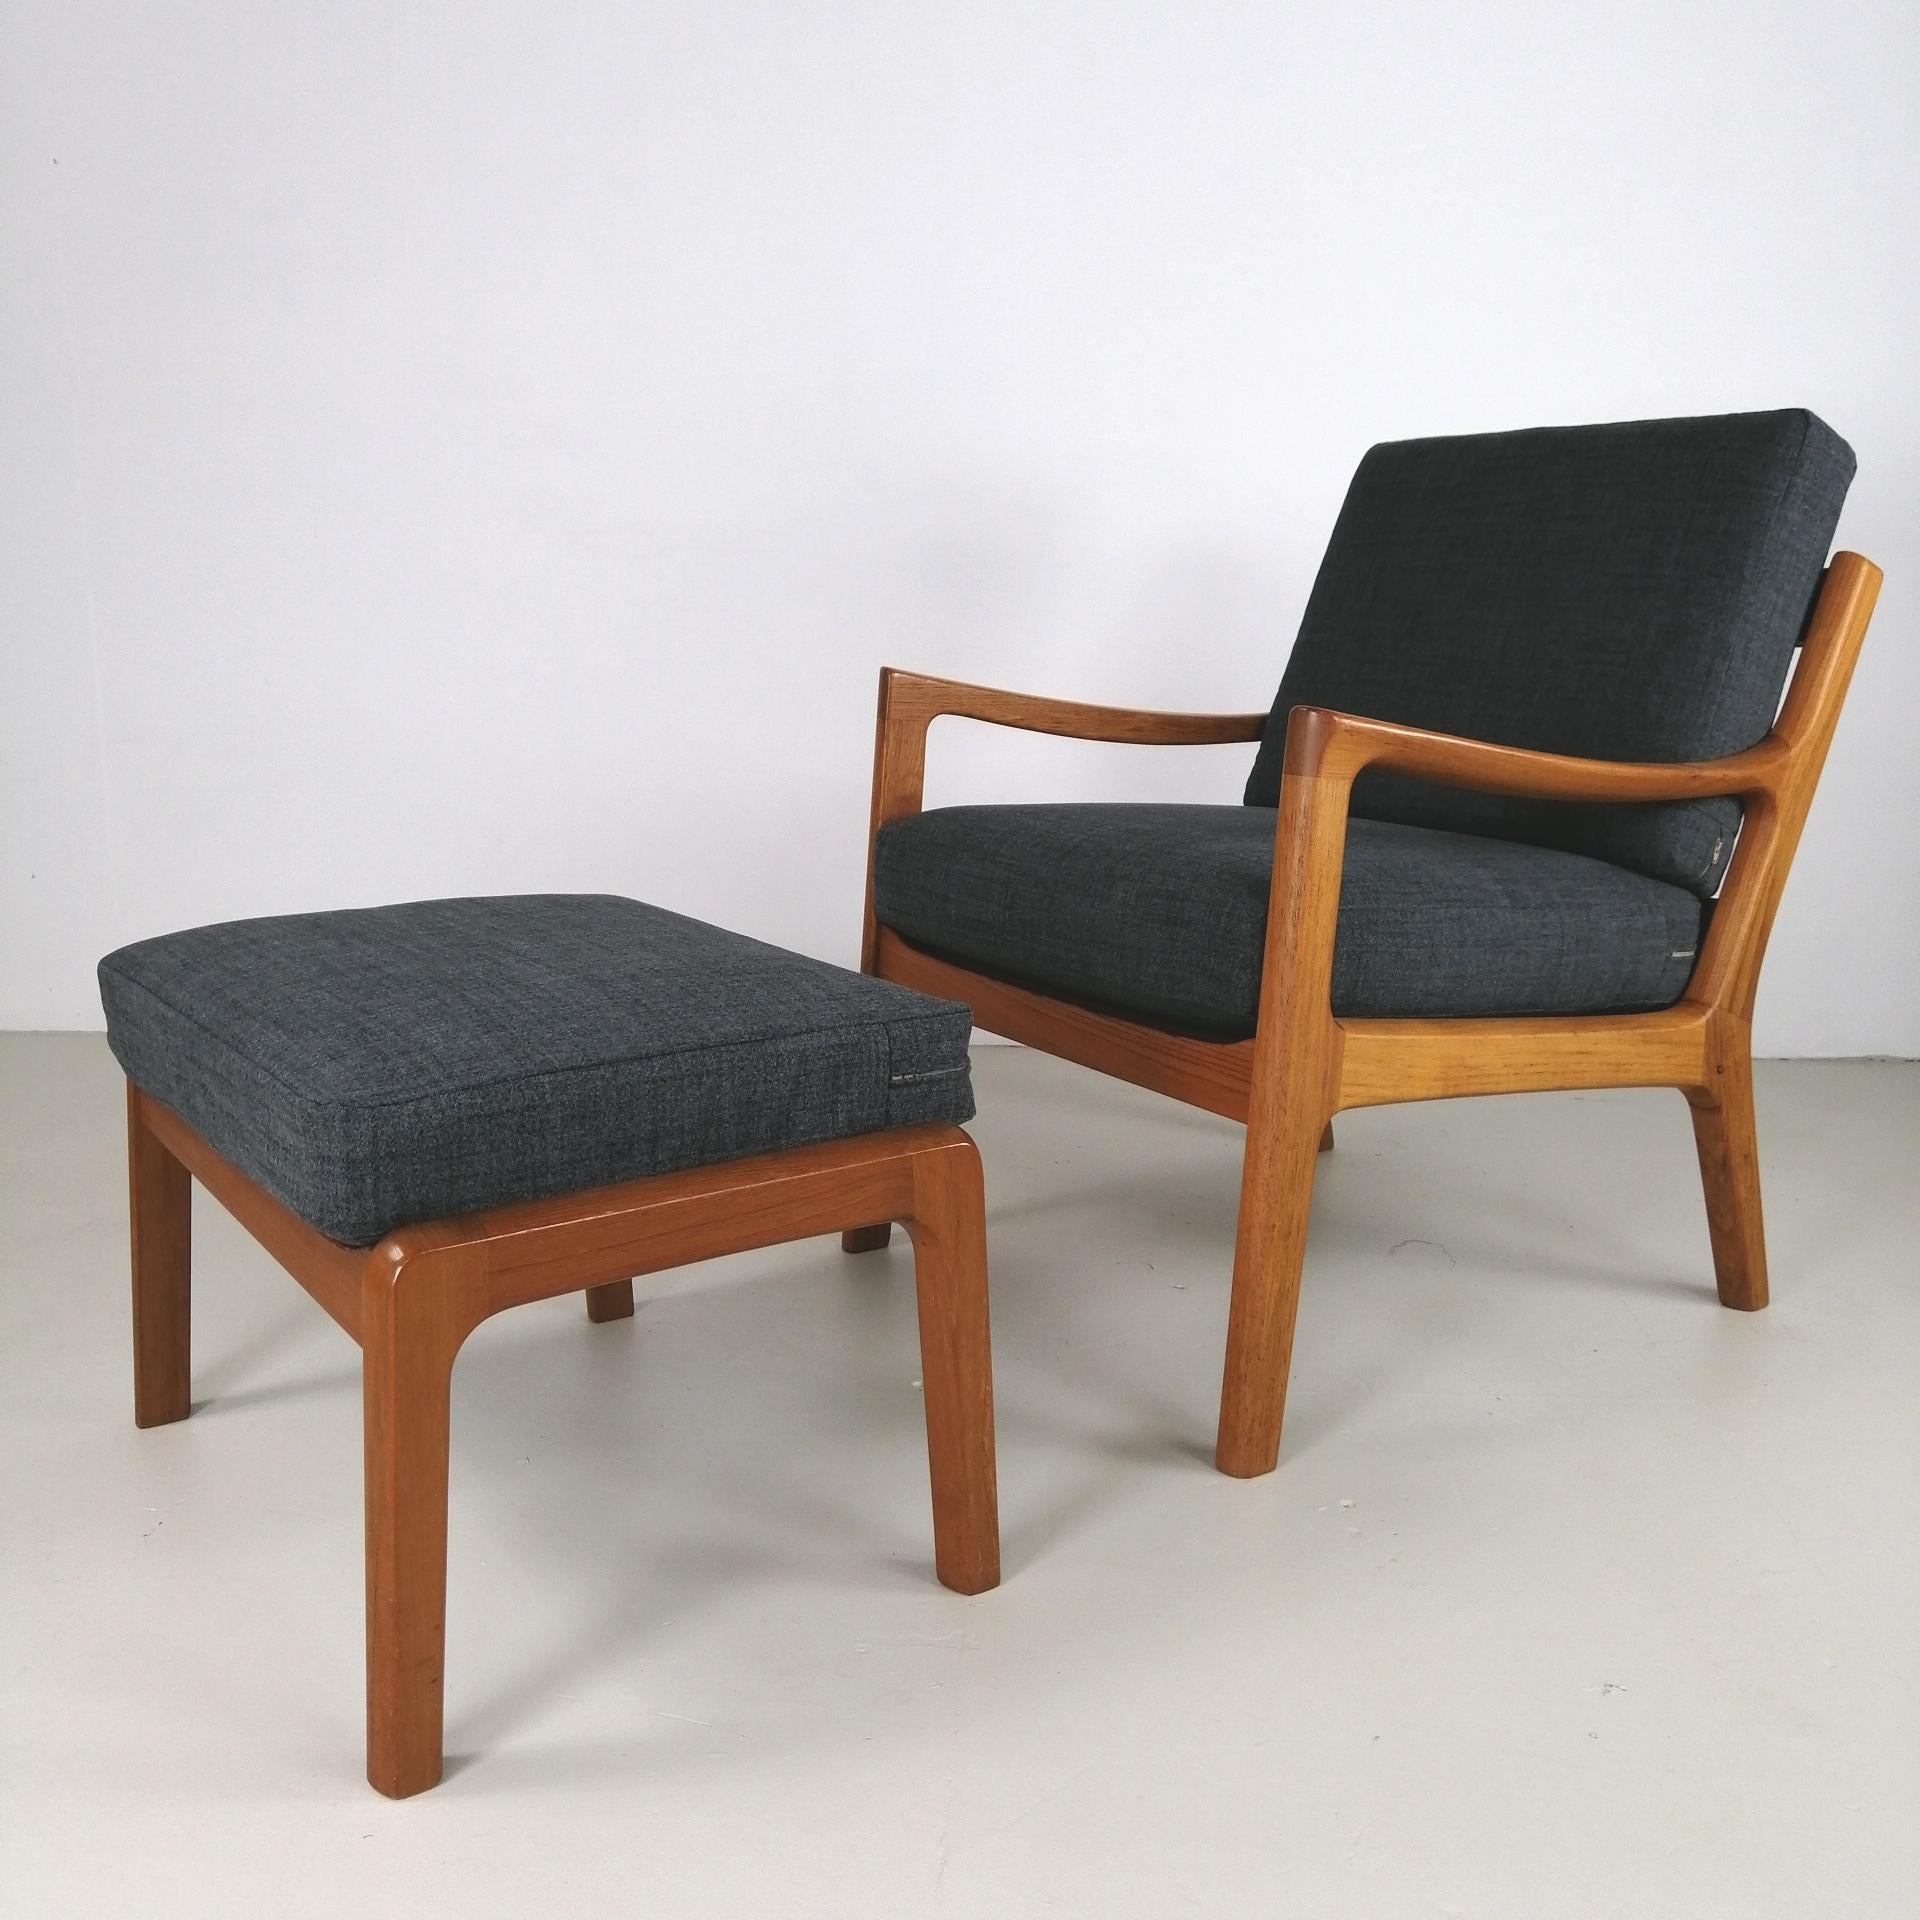 Wool Ole Wanscher 1960s Teak Lounge Chair with Matching Ottoman, Grey Upholstery